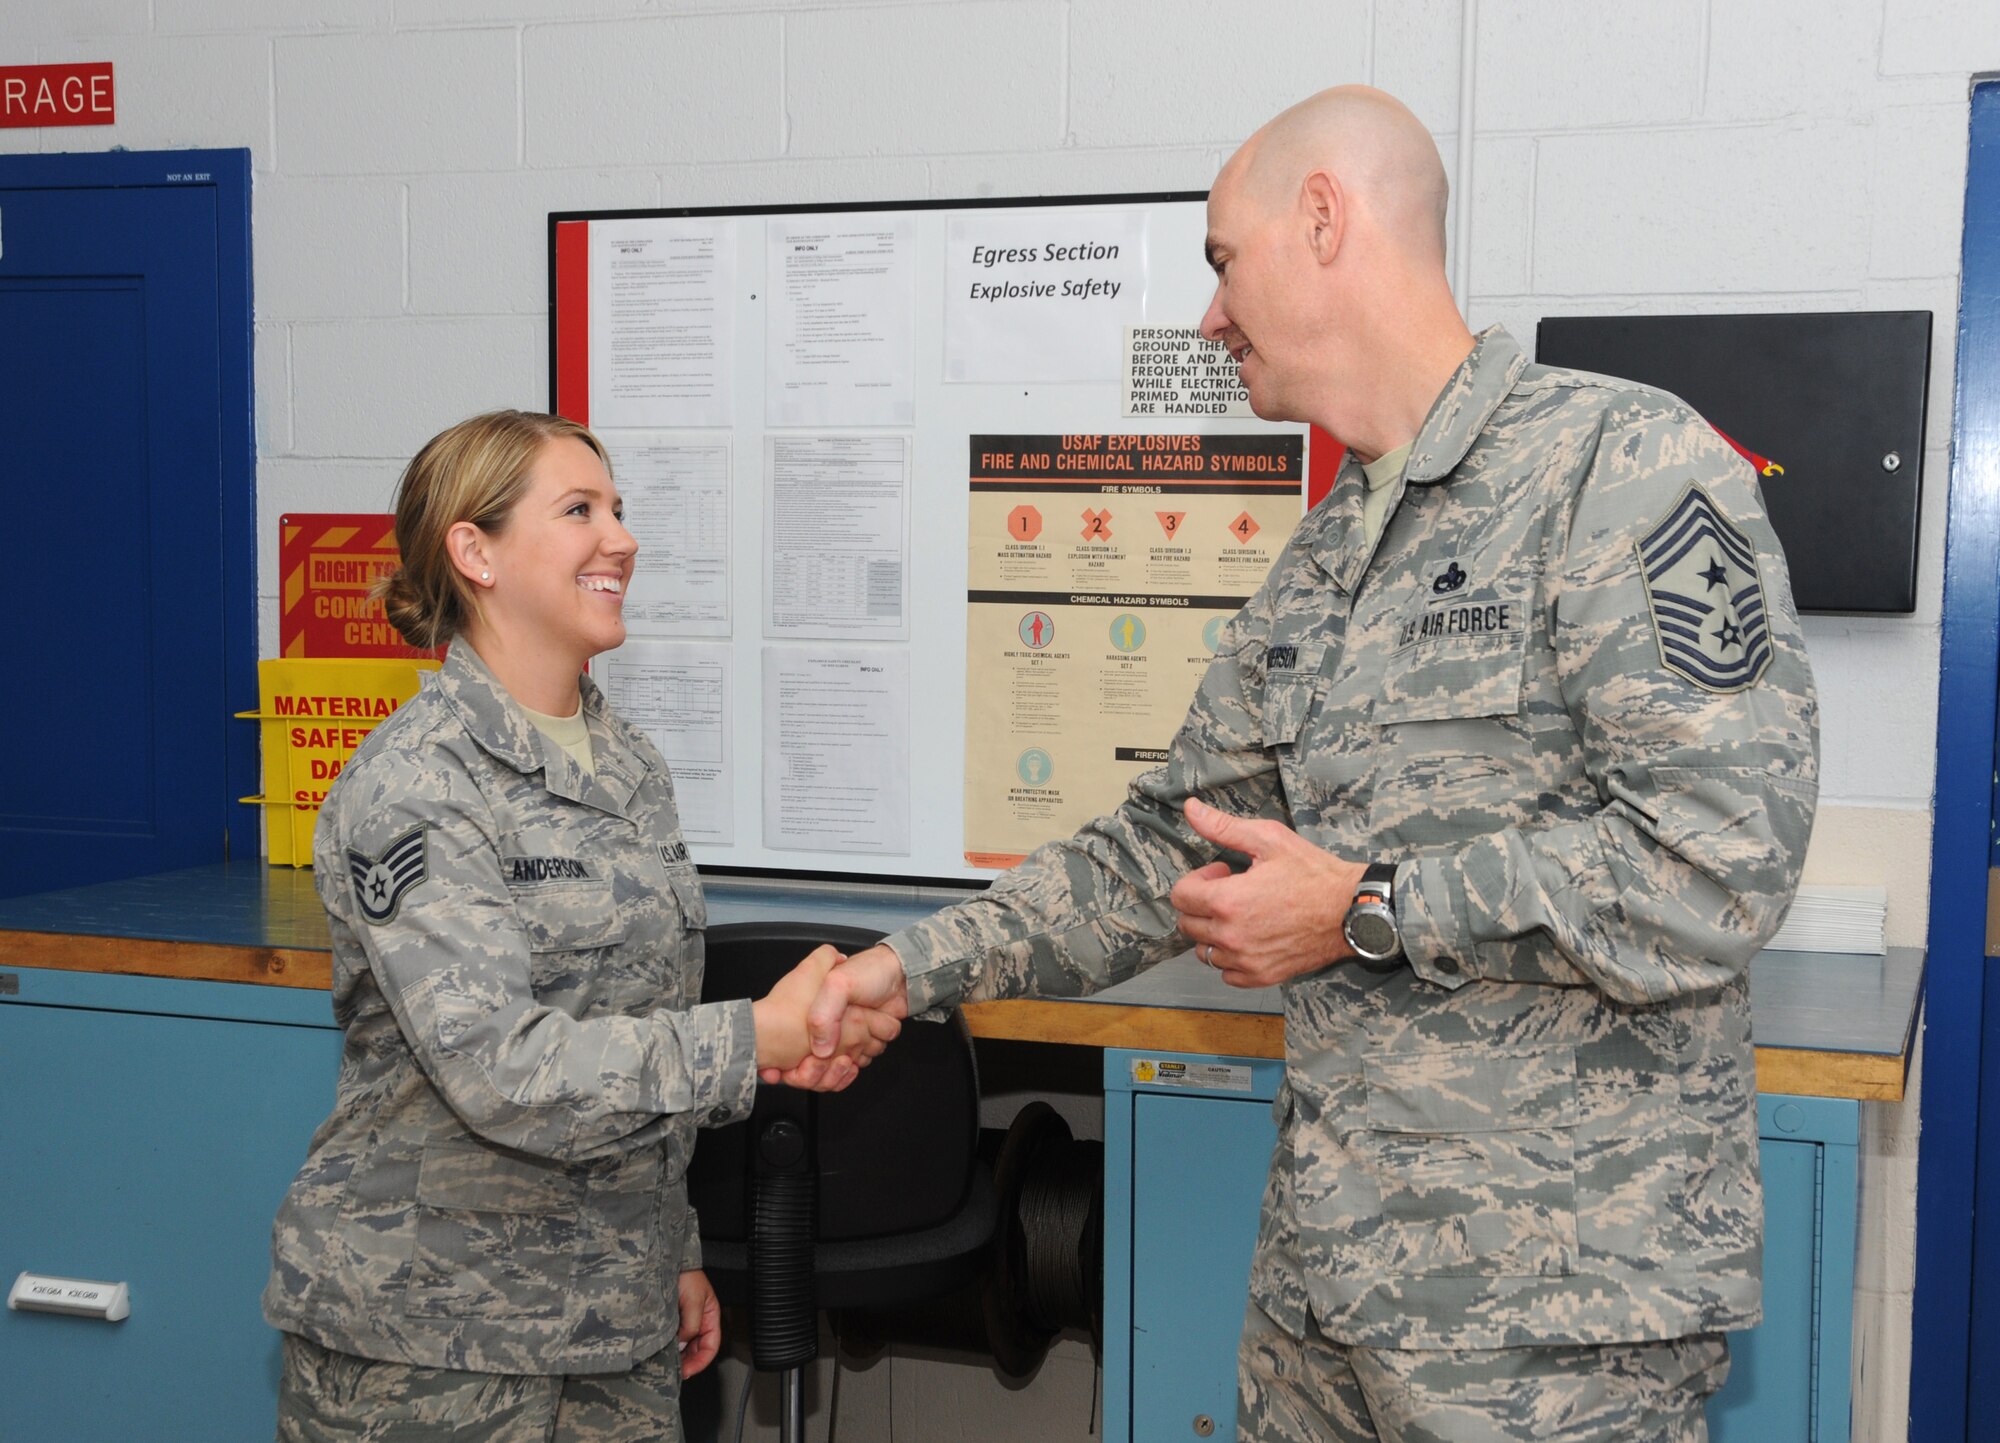 Ronald C. Anderson Jr., Command Chief Master Sgt., 1st Air Force, right, gives his Chief Coin to Staff Sgt. Jennifer Anderson, left, of the 142nd Fighter Wing Maintenance Group, during his tour of the Portland Air National Guard Base, Ore., June 10, 2014. (Air National Guard photo by Tech. Sgt. John Hughel, 142nd Fighter Wing Public Affairs/Released)